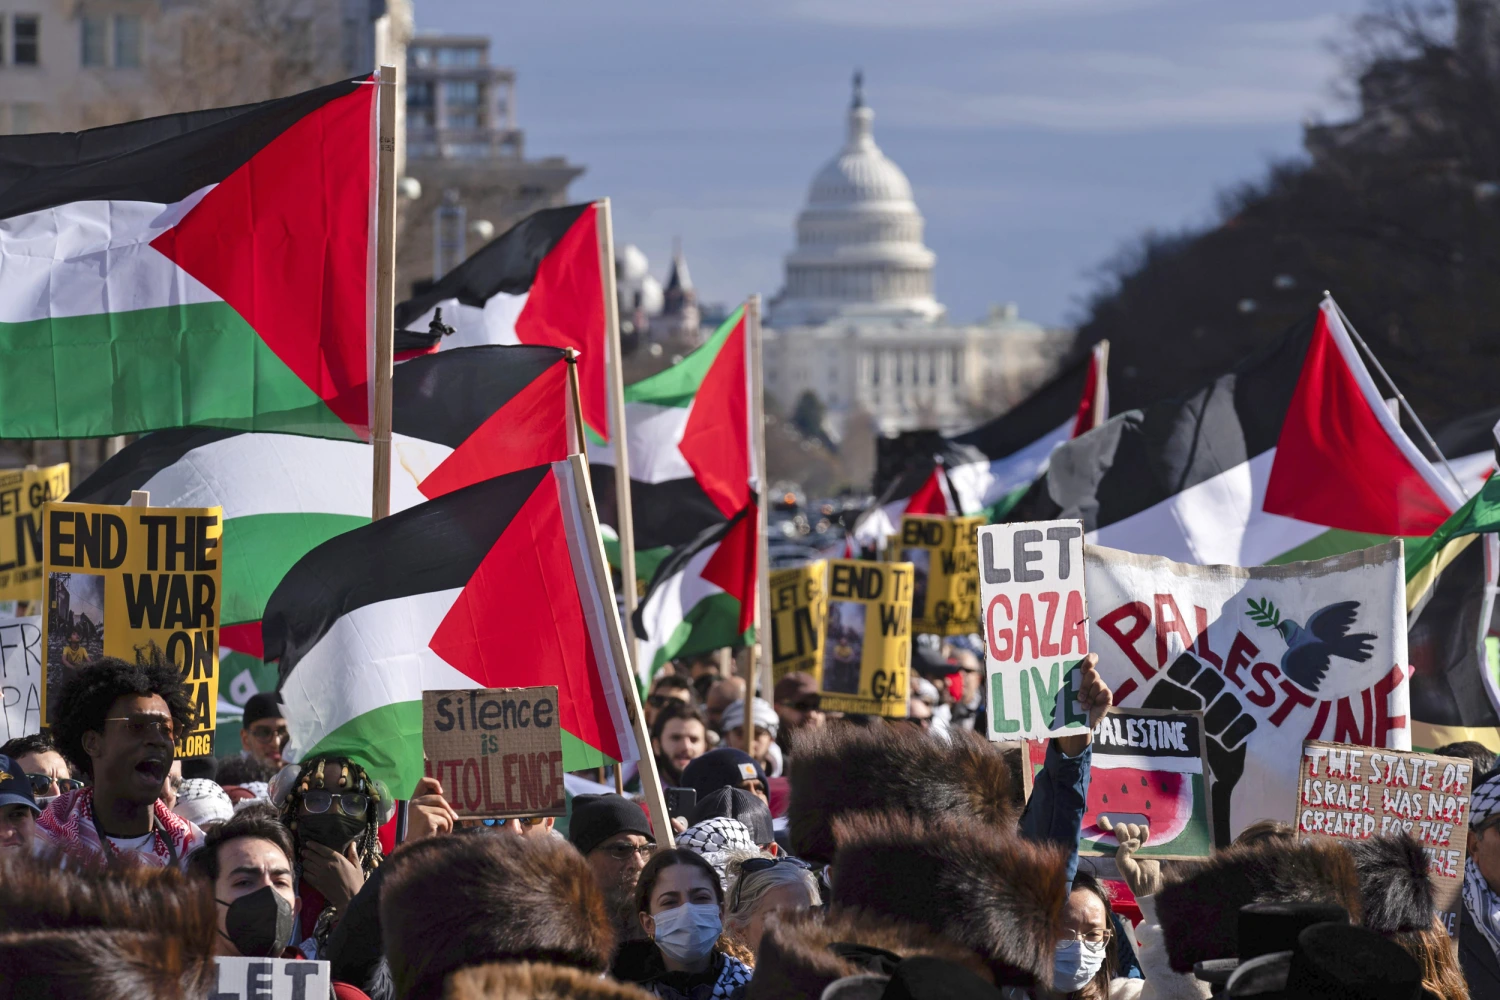 Organizers staged pro-Palestinian marches in London and D.C., while families of hostages delivered messages of hope for loved ones who have been held in captivity for almost 100 days.